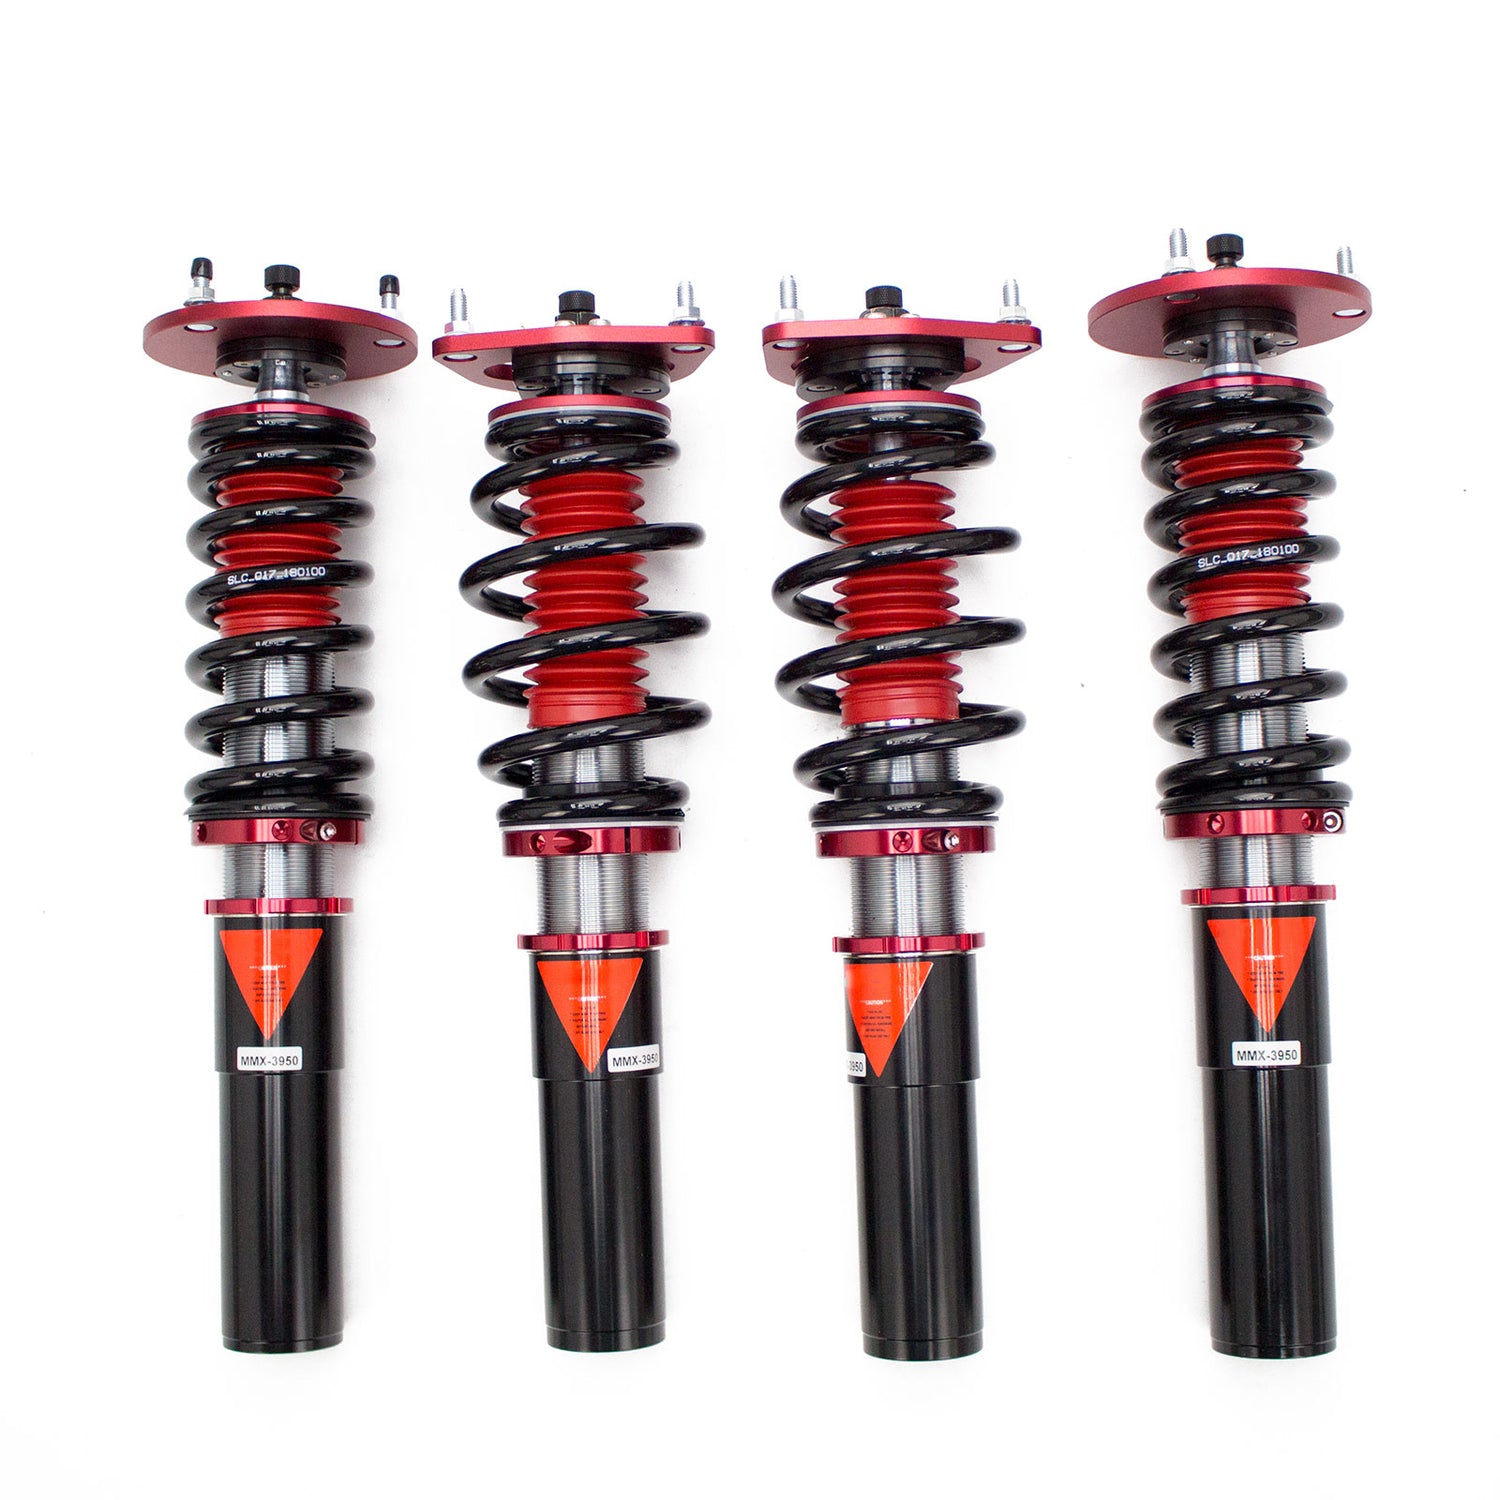 MMX3950-B MAXX Coilovers Lowering Kit, Fully Adjustable, Ride Height, 40 Clicks Rebound Settings, Porsche Cayman(981) 2014-16